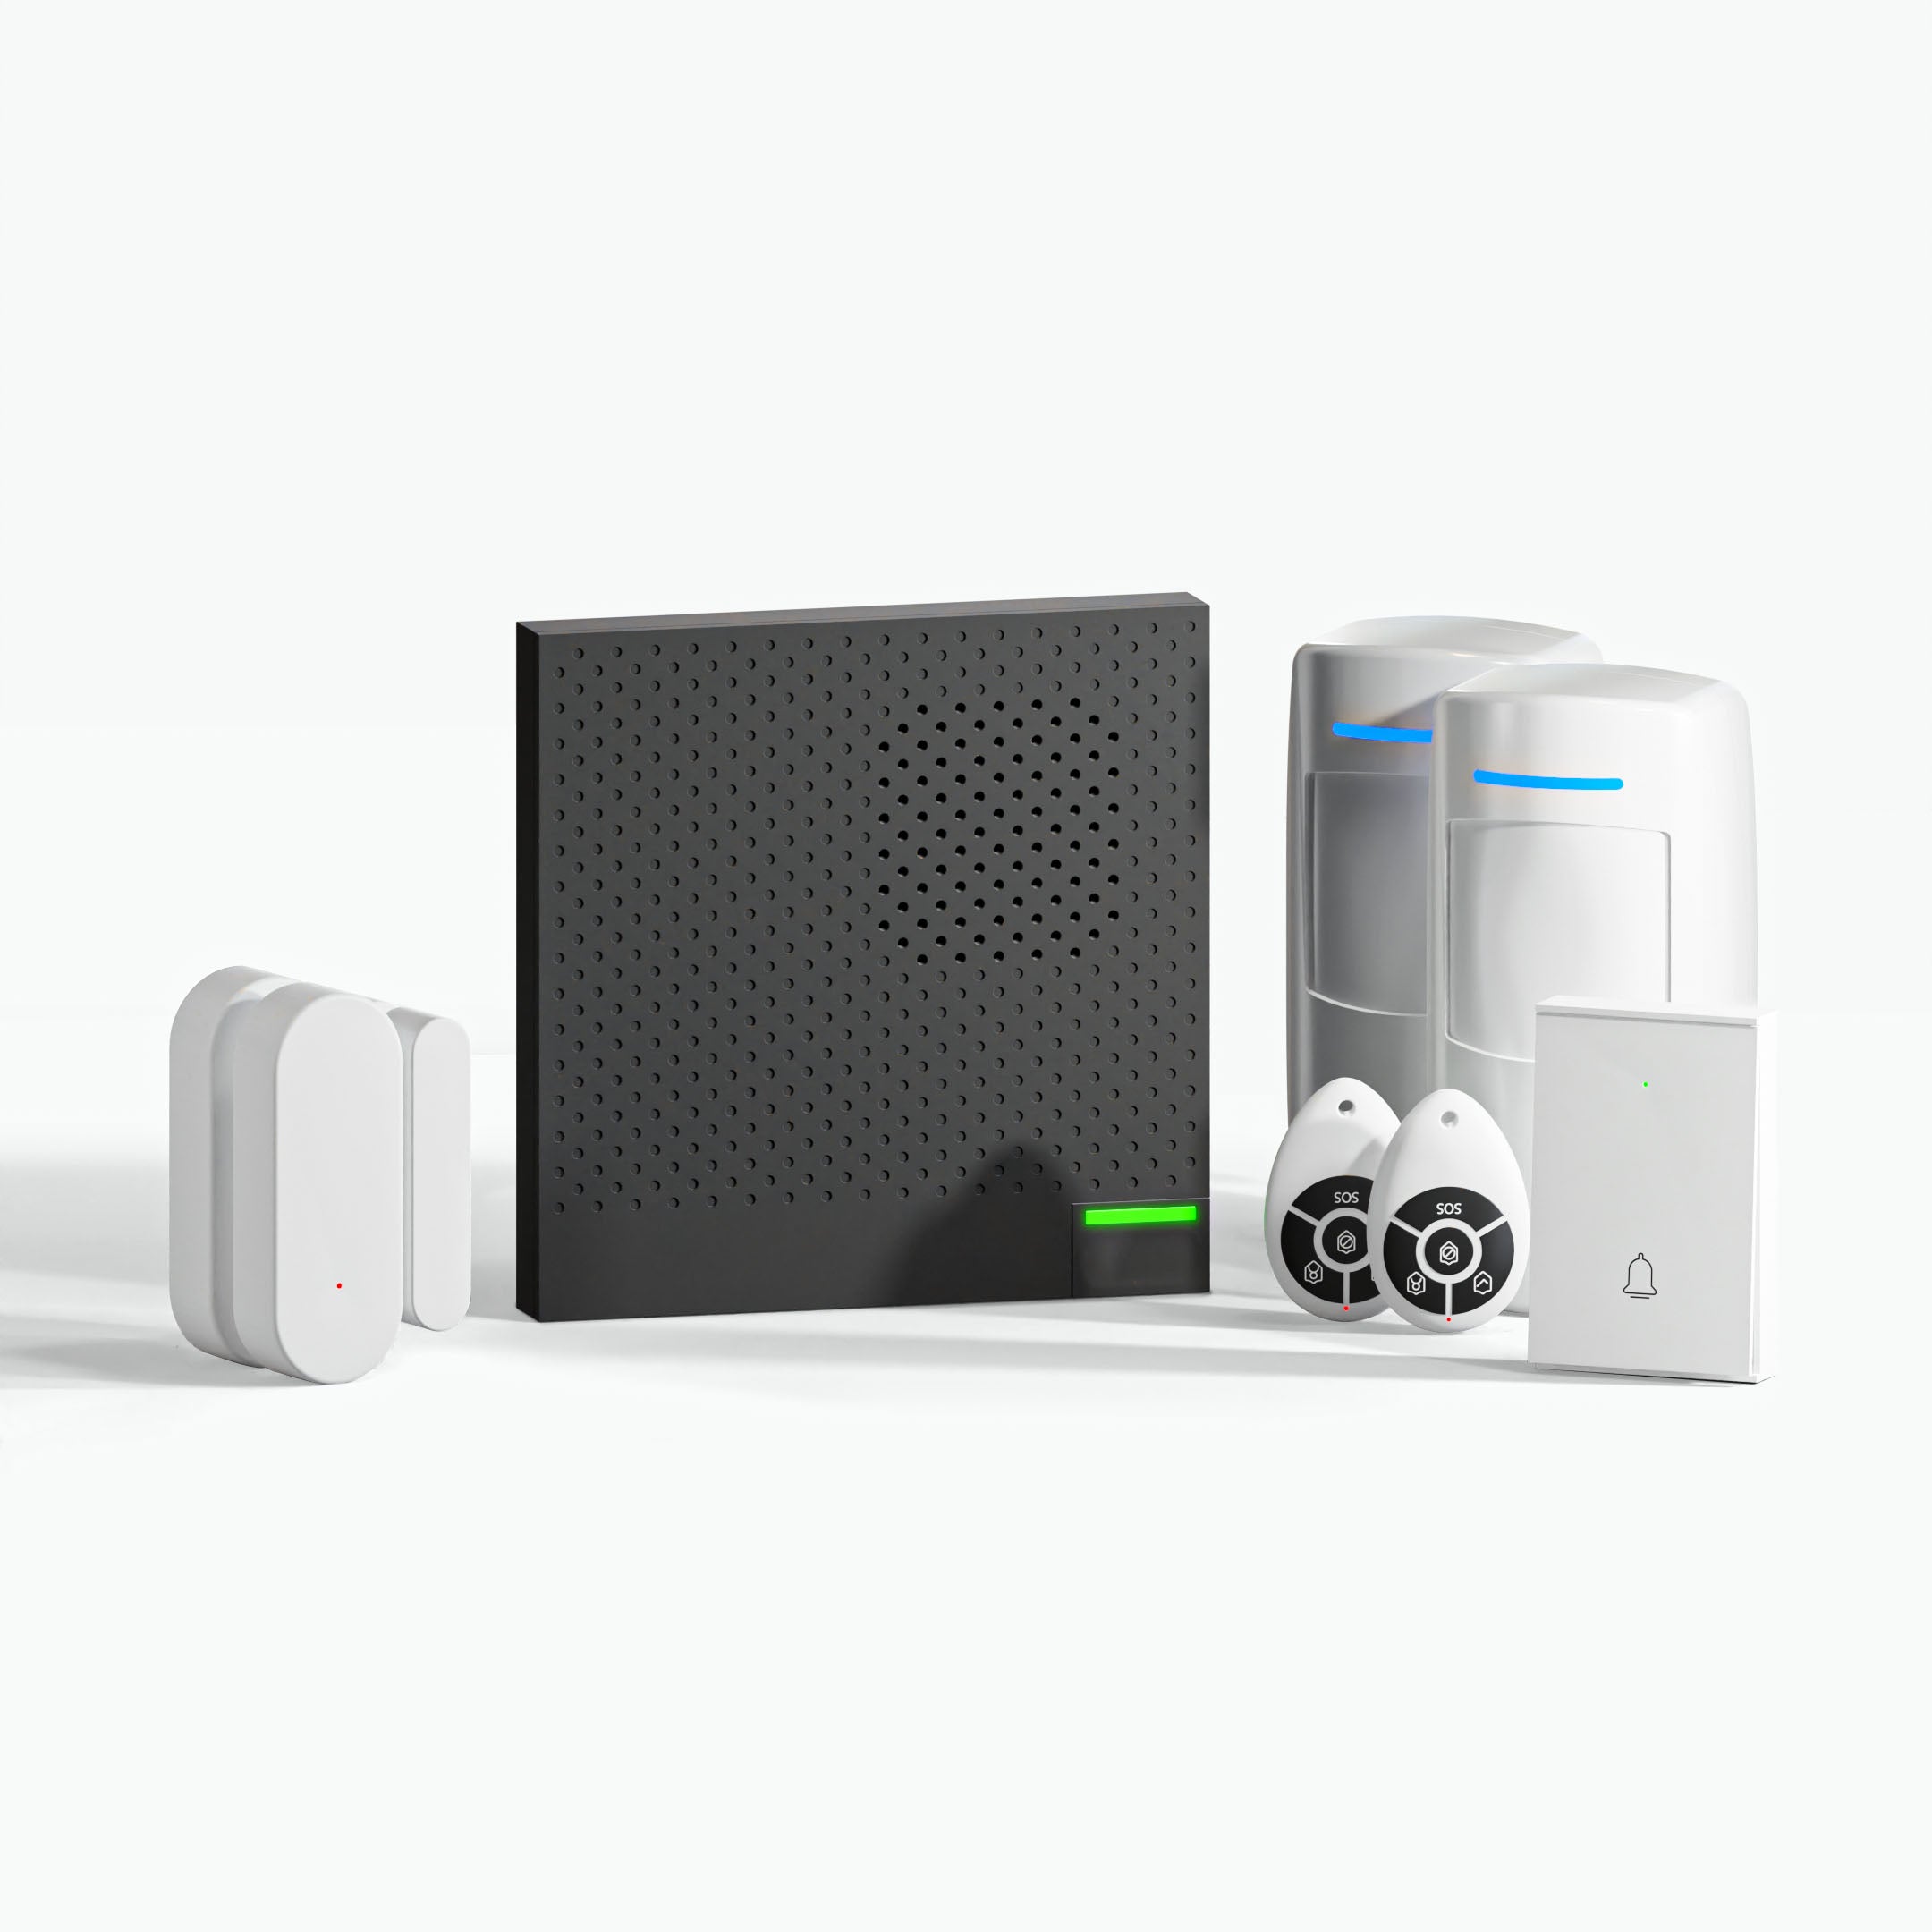 Staniot SecBox 3 smart security alarm system Standard Combo selection on a white background